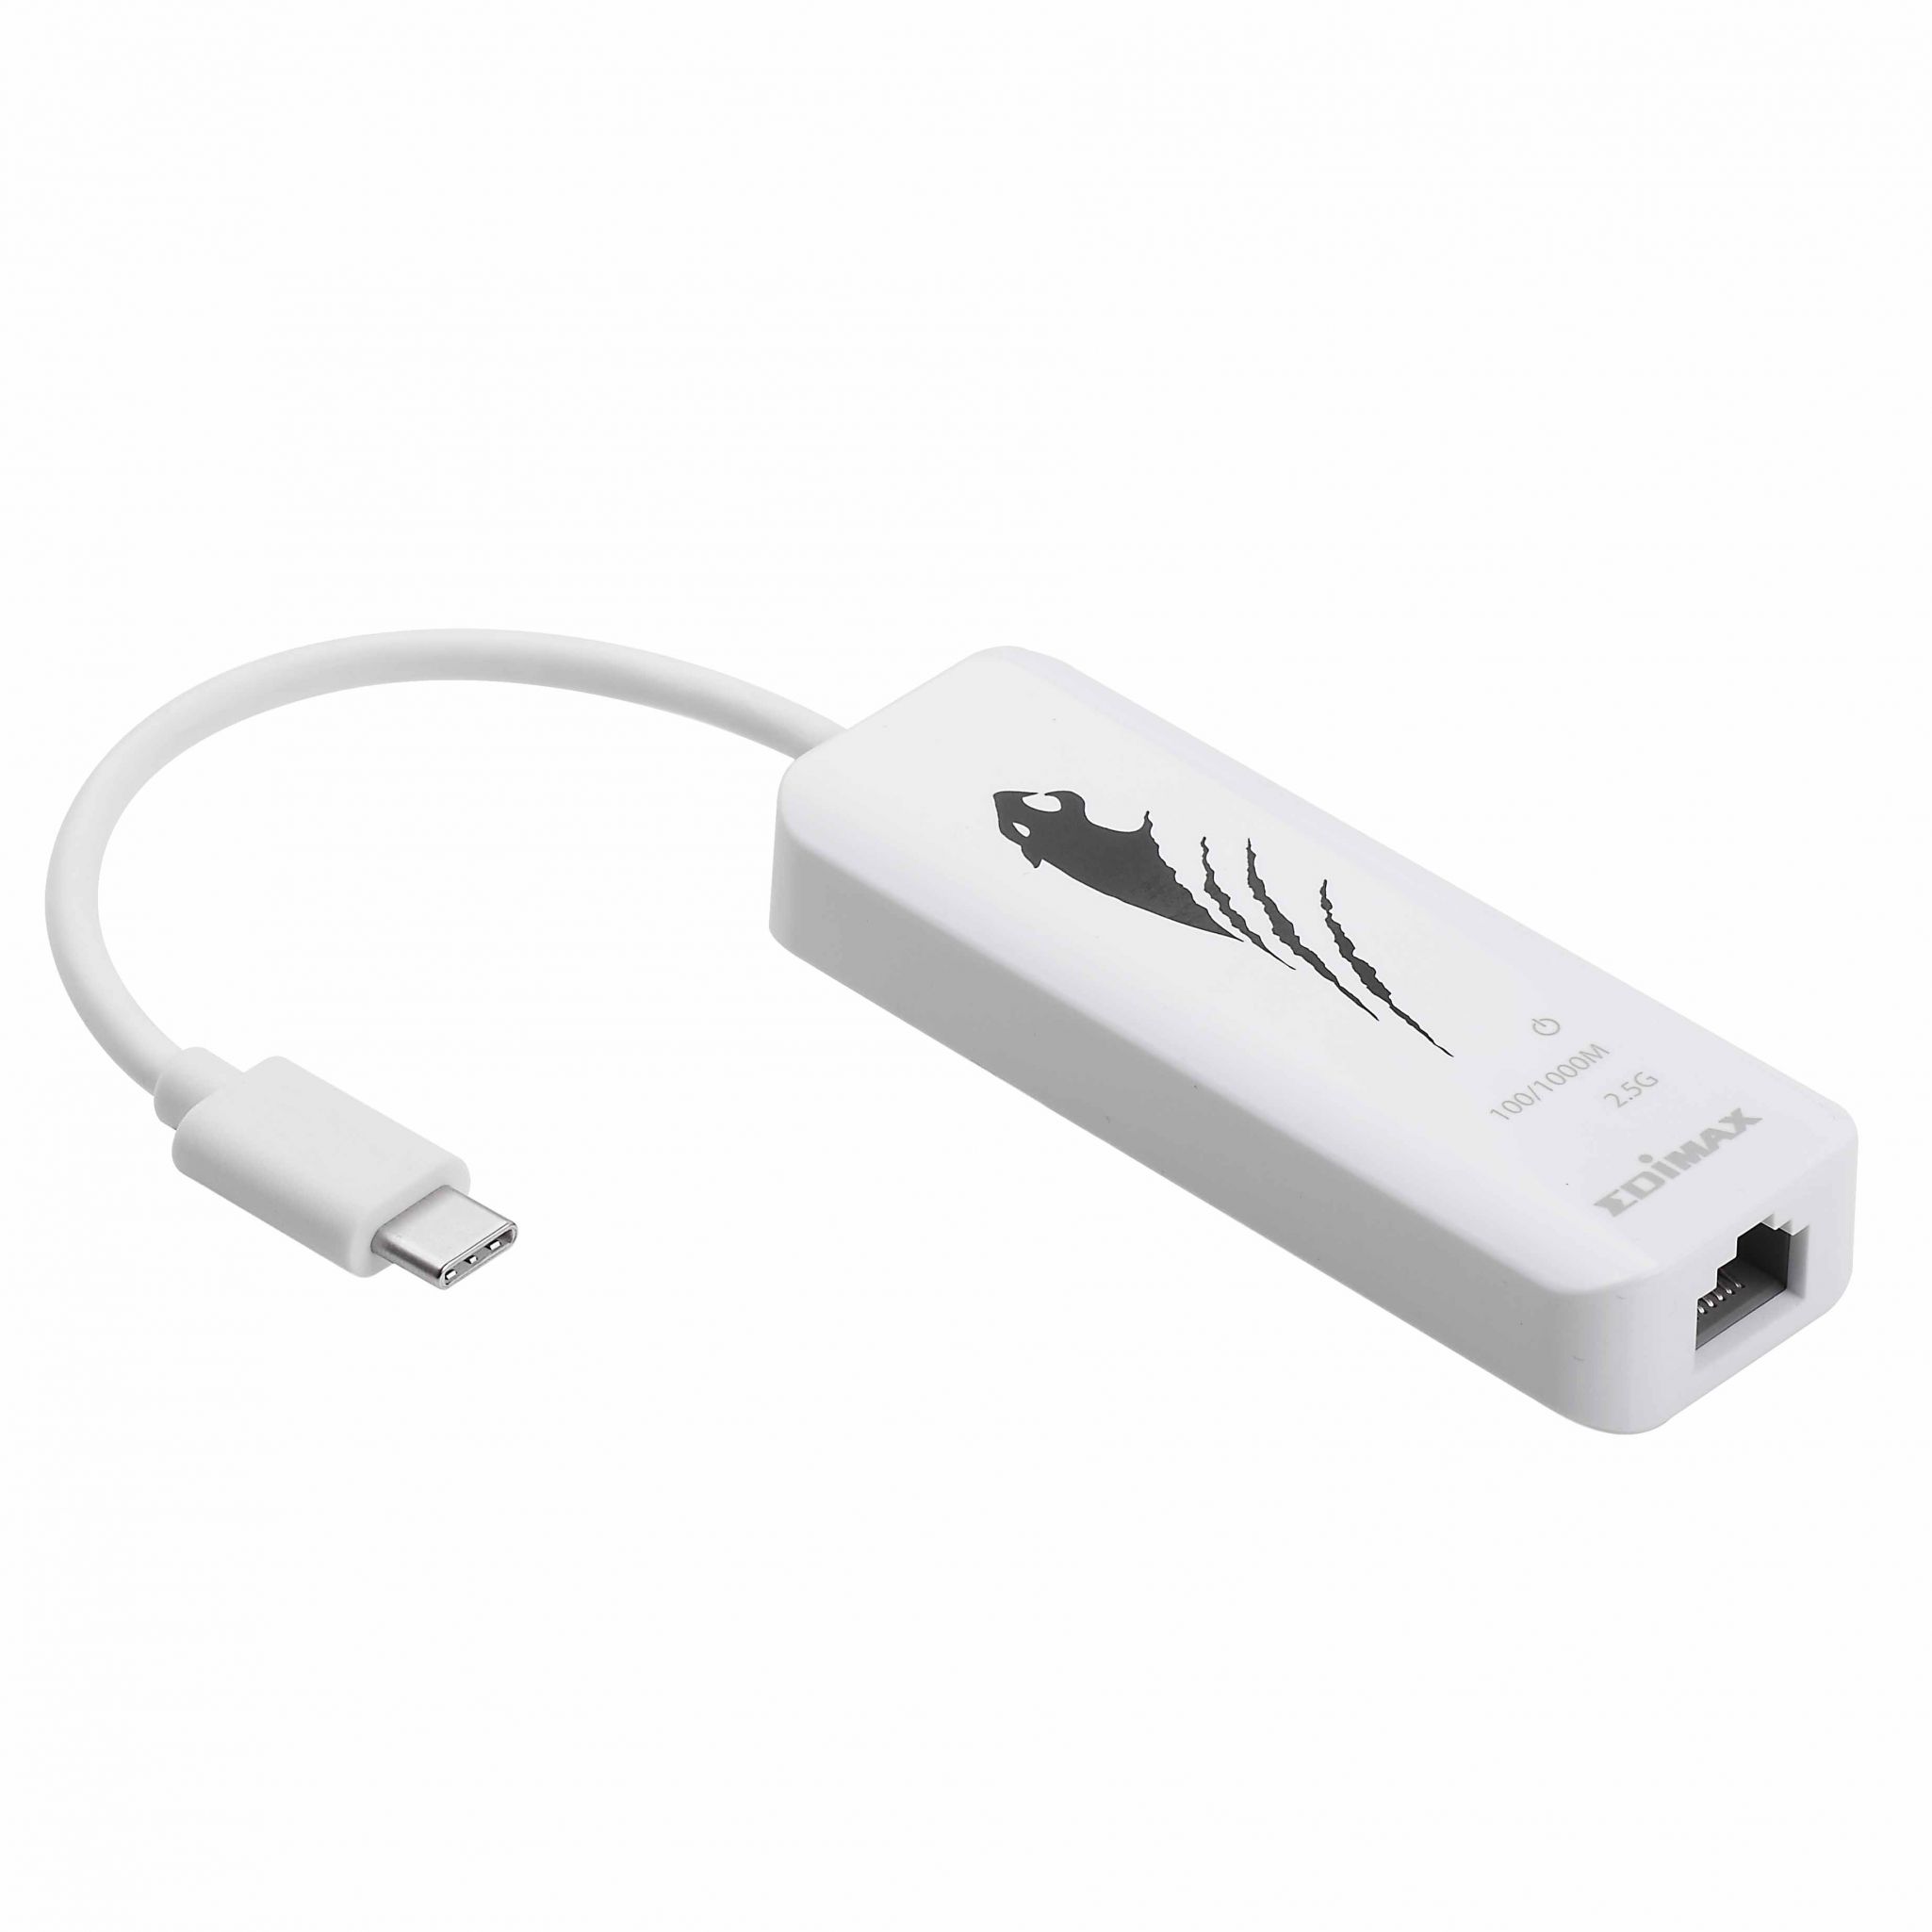 gigaware usb to ethernet cat no 2503584